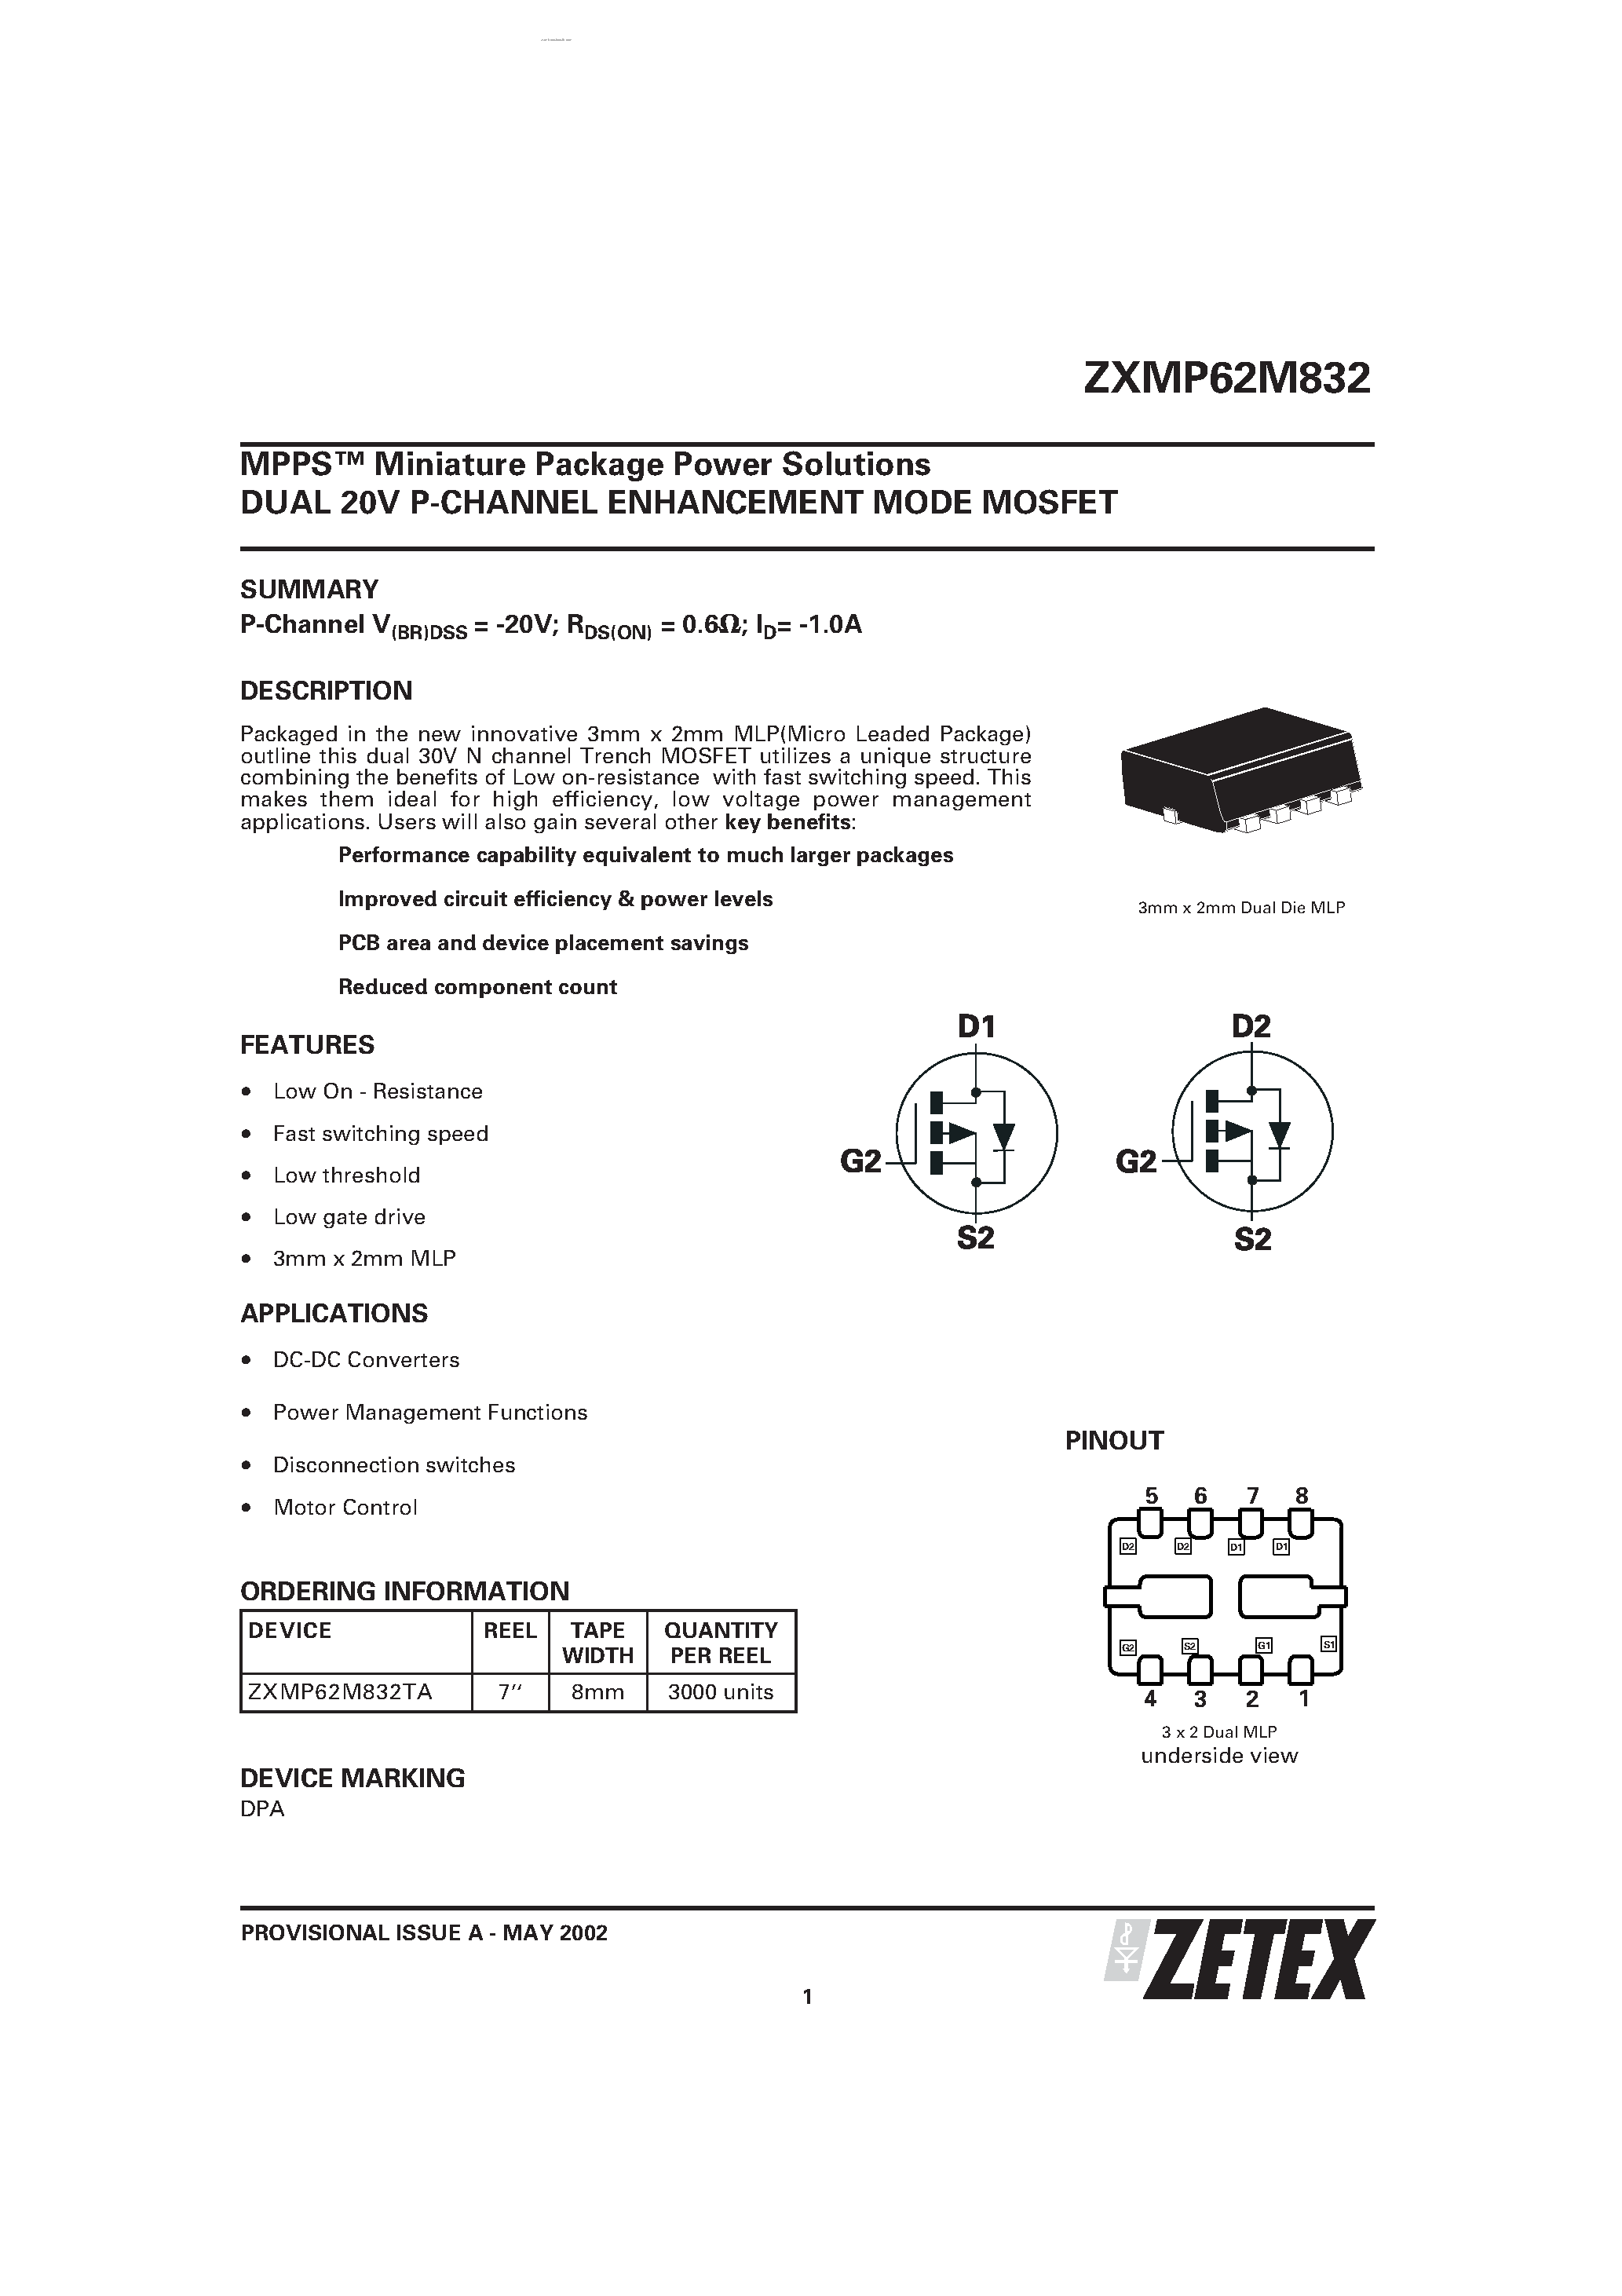 Datasheet ZXMP62M832 - MPPS Miniature Package Power Solutions DUAL 20V P-CHANNEL ENHANCEMENT MODE MOSFET page 1